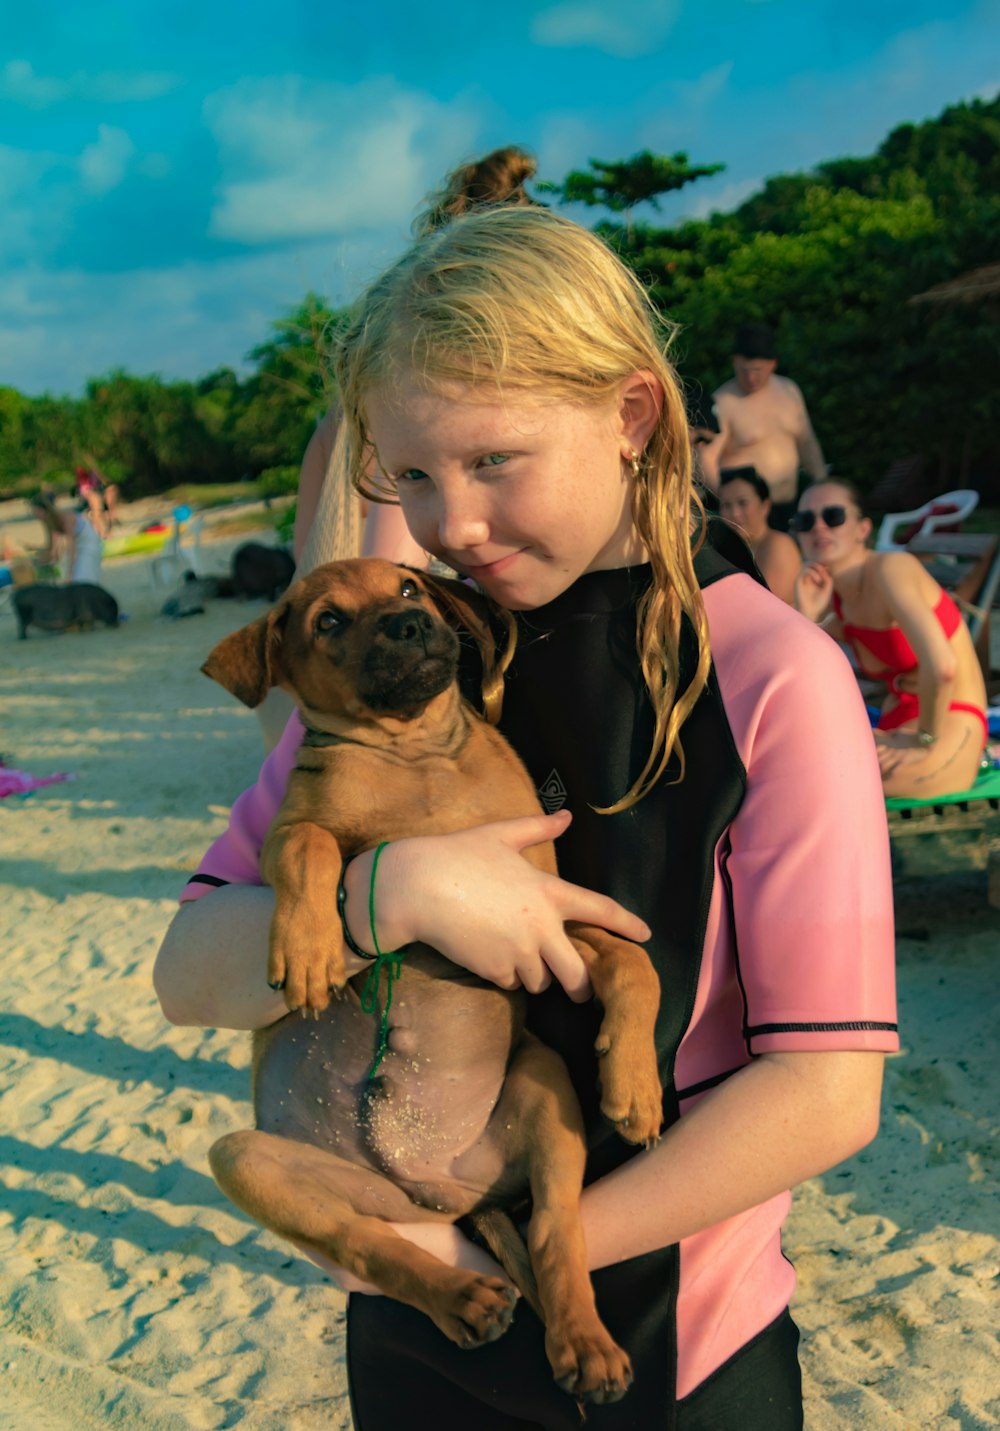 a young girl holding a dog on a beach